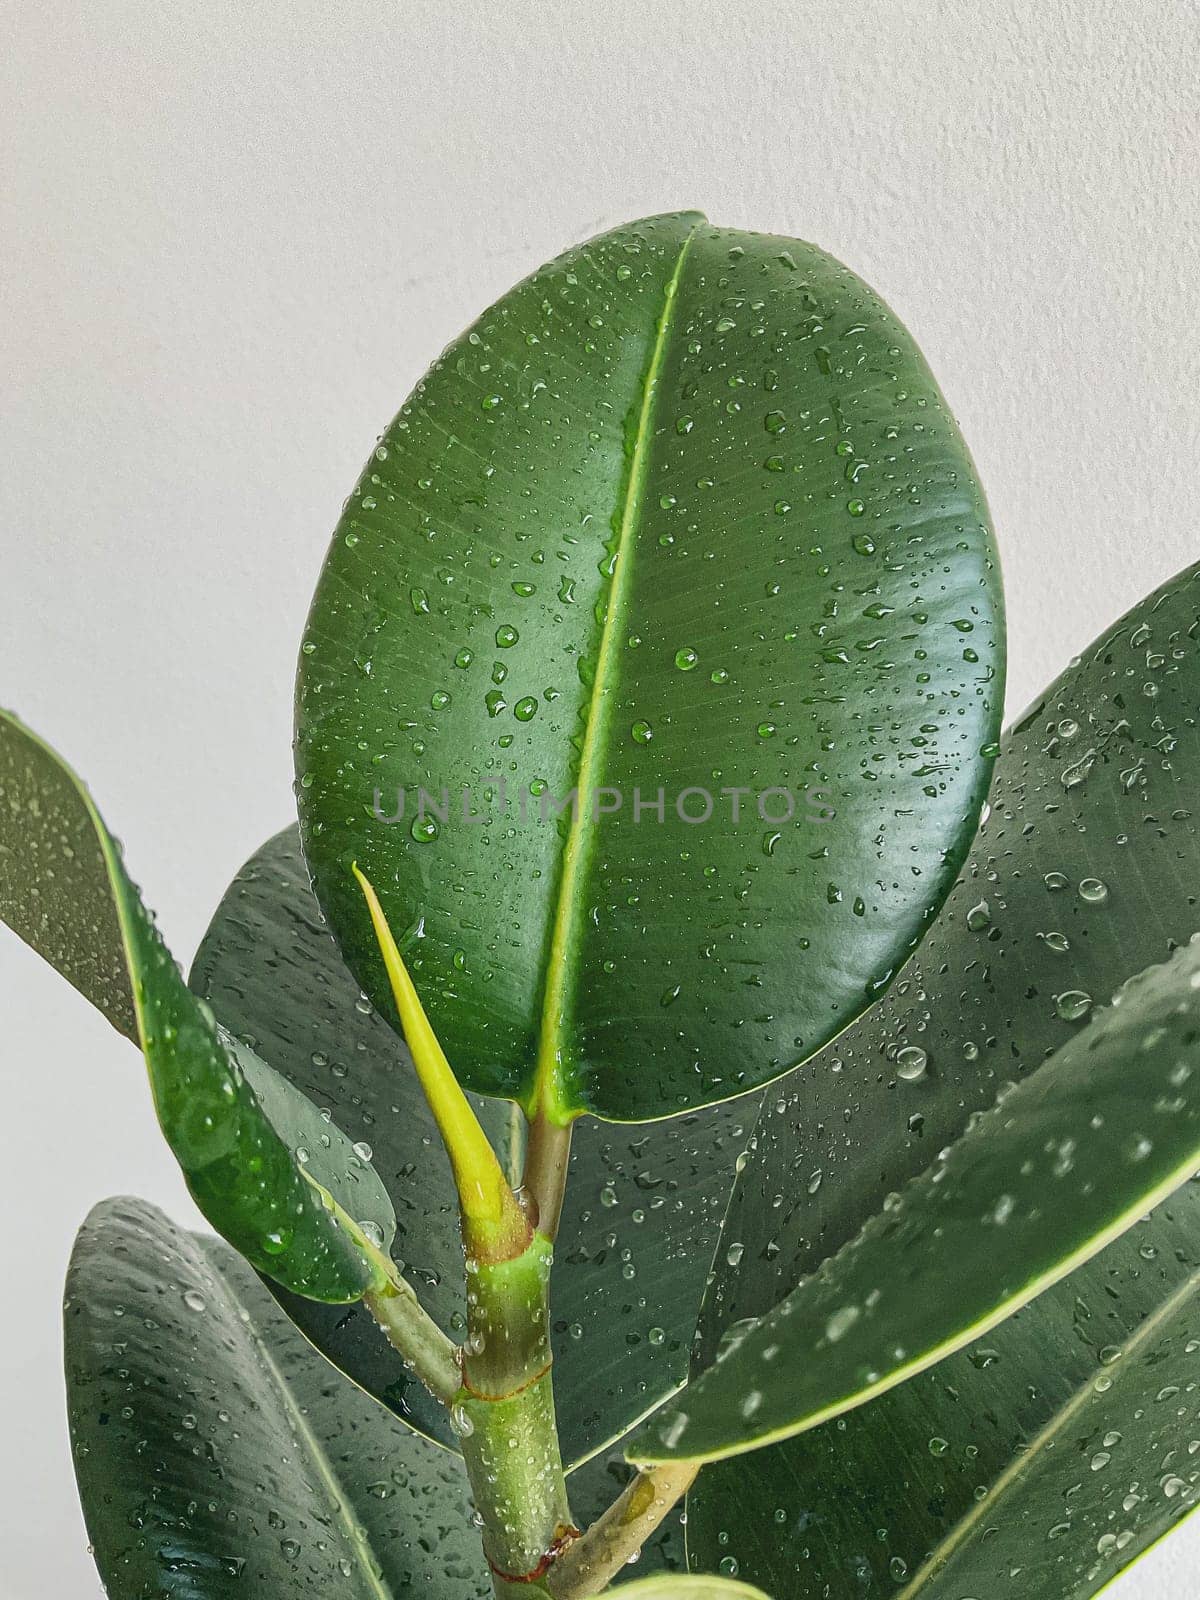 green bush leaves of ficus natural. on a white background. with drops of water on the leaves. High quality photo